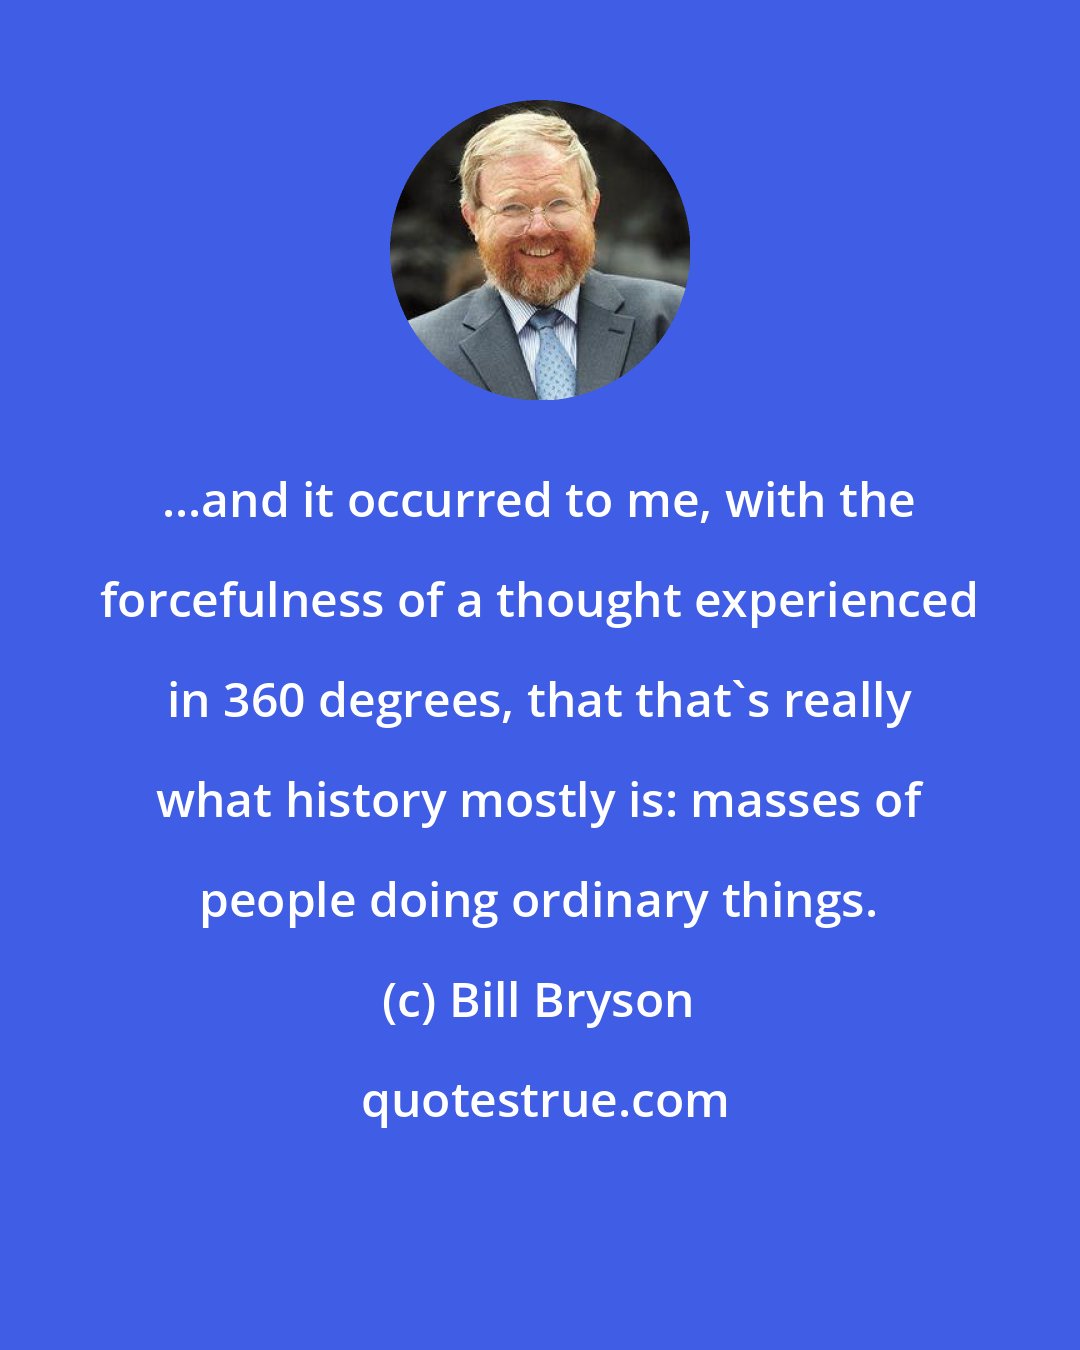 Bill Bryson: ...and it occurred to me, with the forcefulness of a thought experienced in 360 degrees, that that's really what history mostly is: masses of people doing ordinary things.